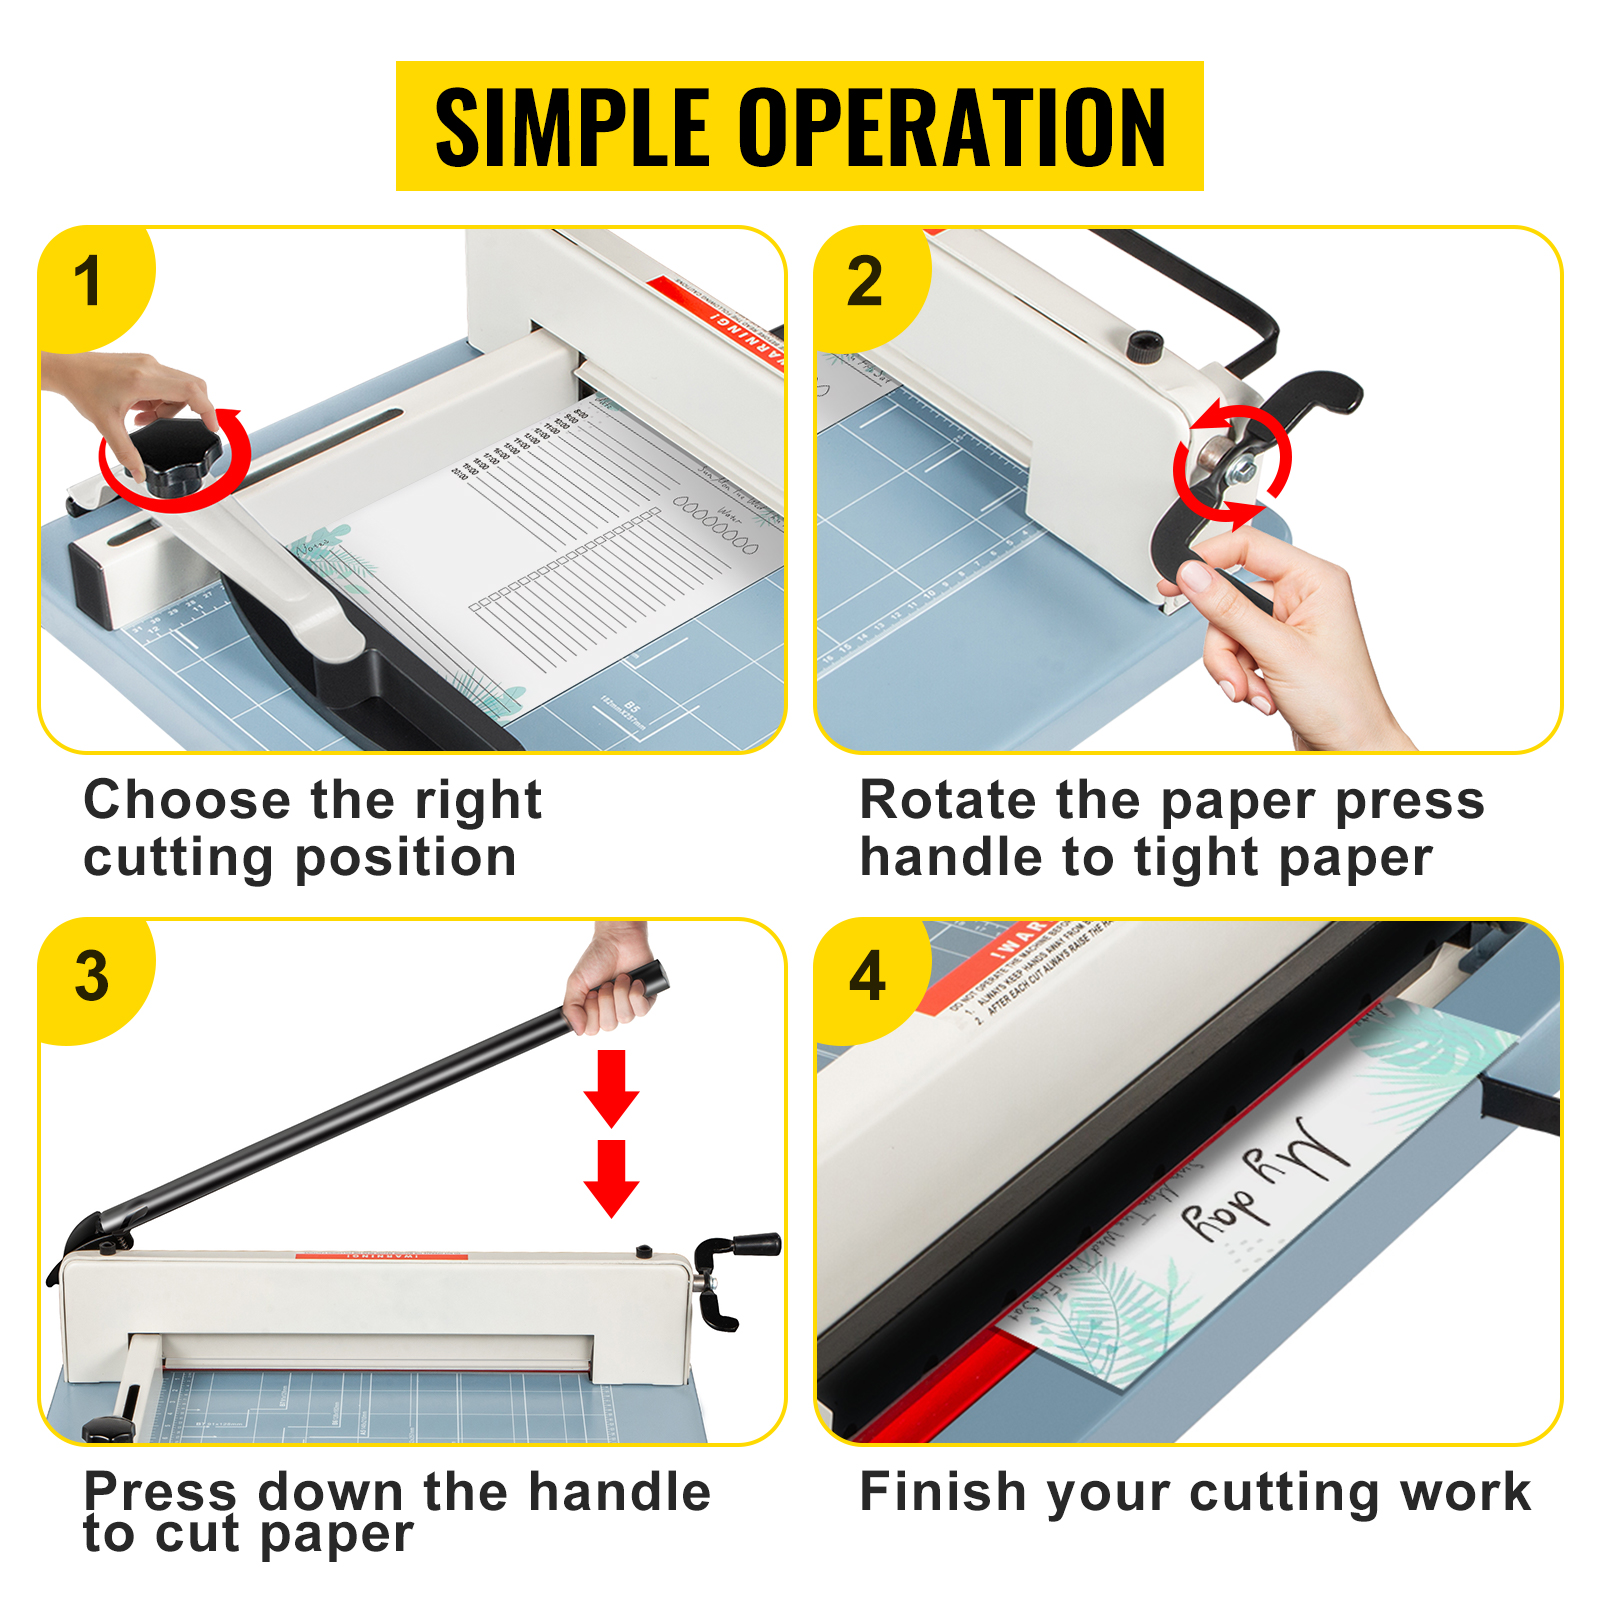 VEVOR Paper Cutter 12Inch A4 Commercial Heavy Duty Paper Cutter 300 Sheets  45HRC Hardness Stack Cutter Metal Base Desktop Stack Cutter for Home Office  (A4)